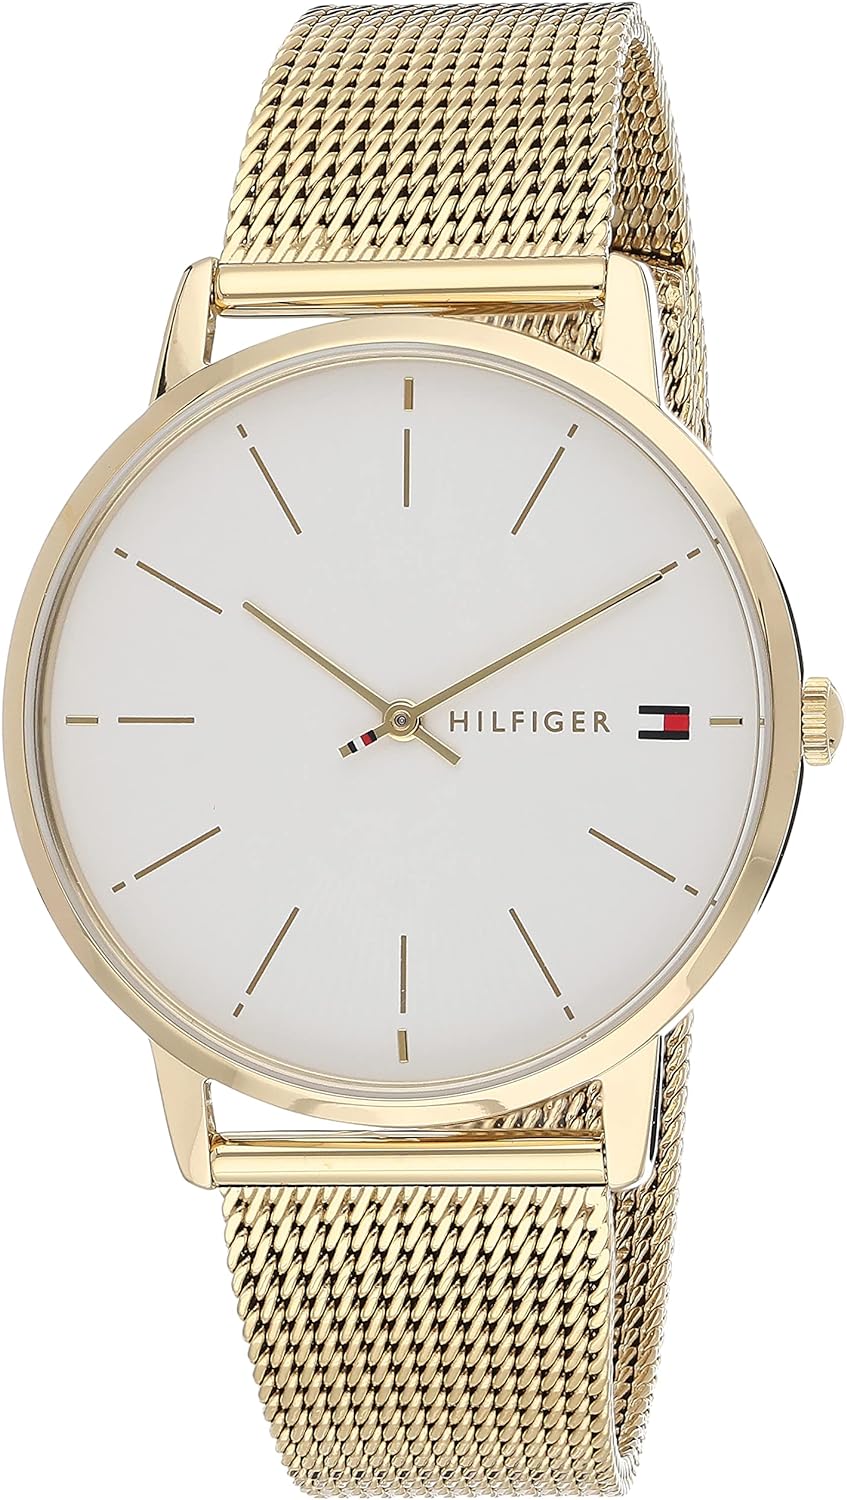 Tommy Hilfiger Analogue Quartz Watch for women with Stainless Steel mesh bracelet